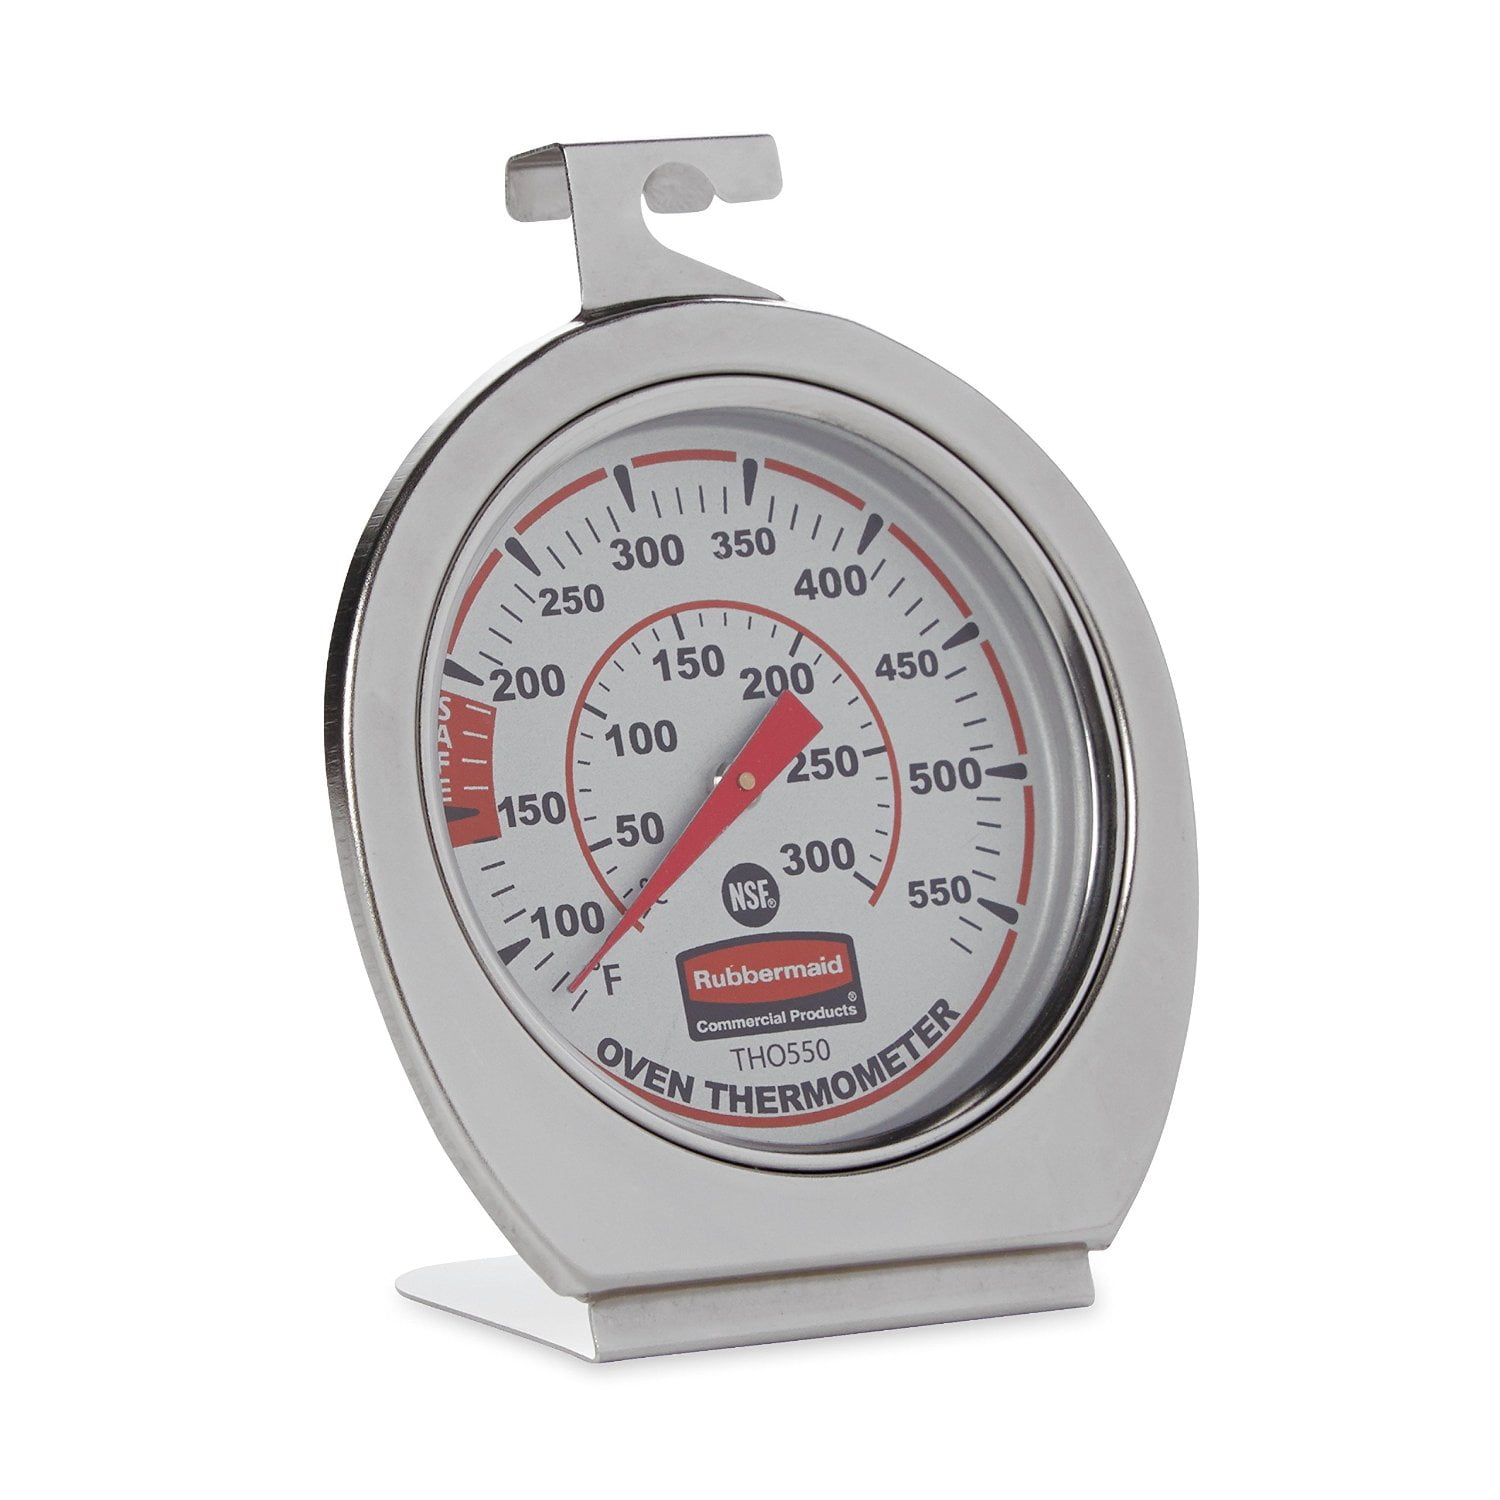 D & S Vending Inc - IRT550 - High Temperature Thermometer- 50-500 Degrees